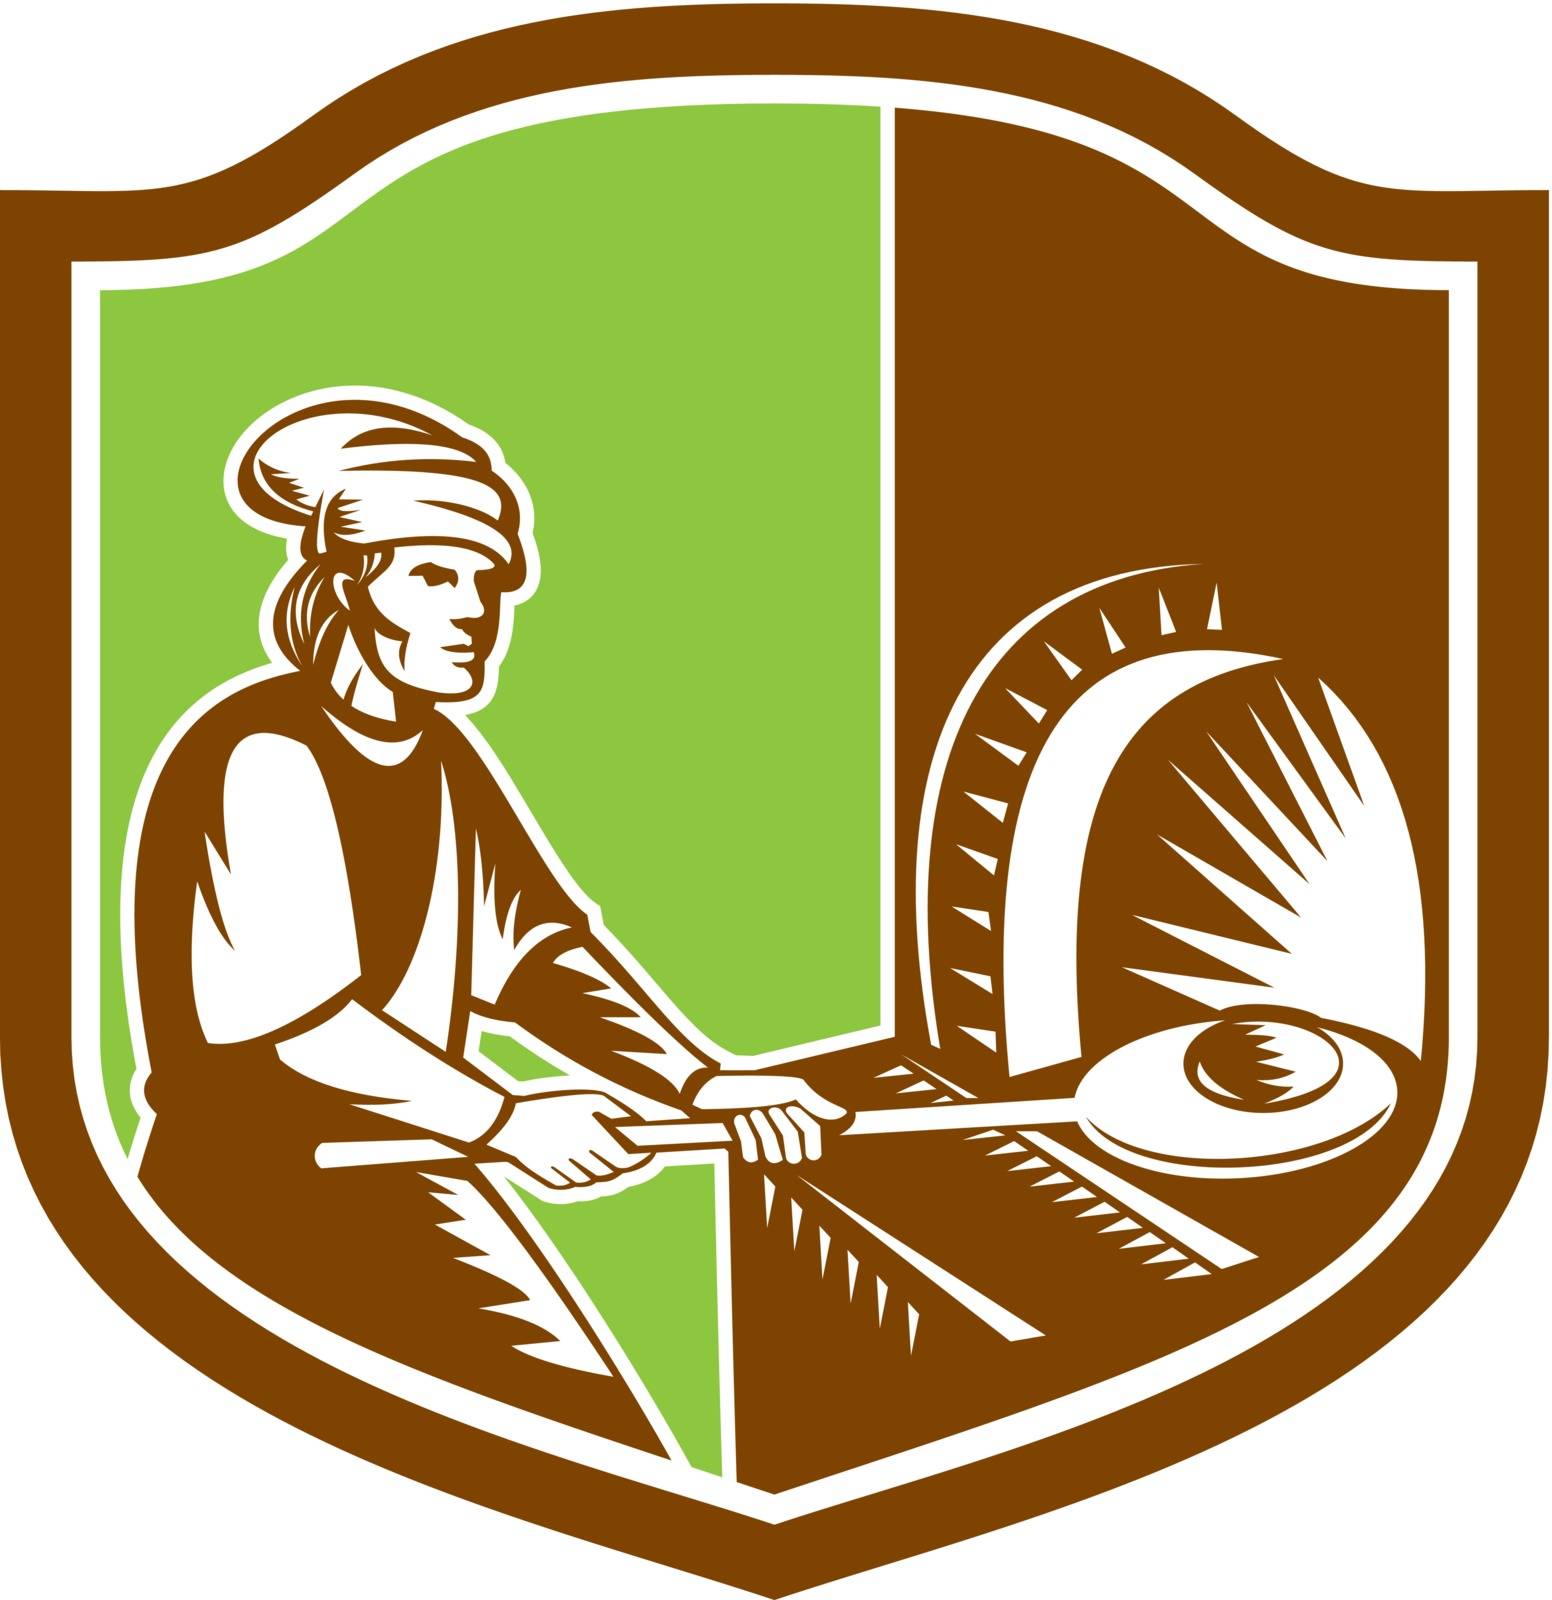 Illustration of a baker pizza maker holding peel pan with bread dough putting in open fire woodfire oven set inside shield crest done in retro style. 